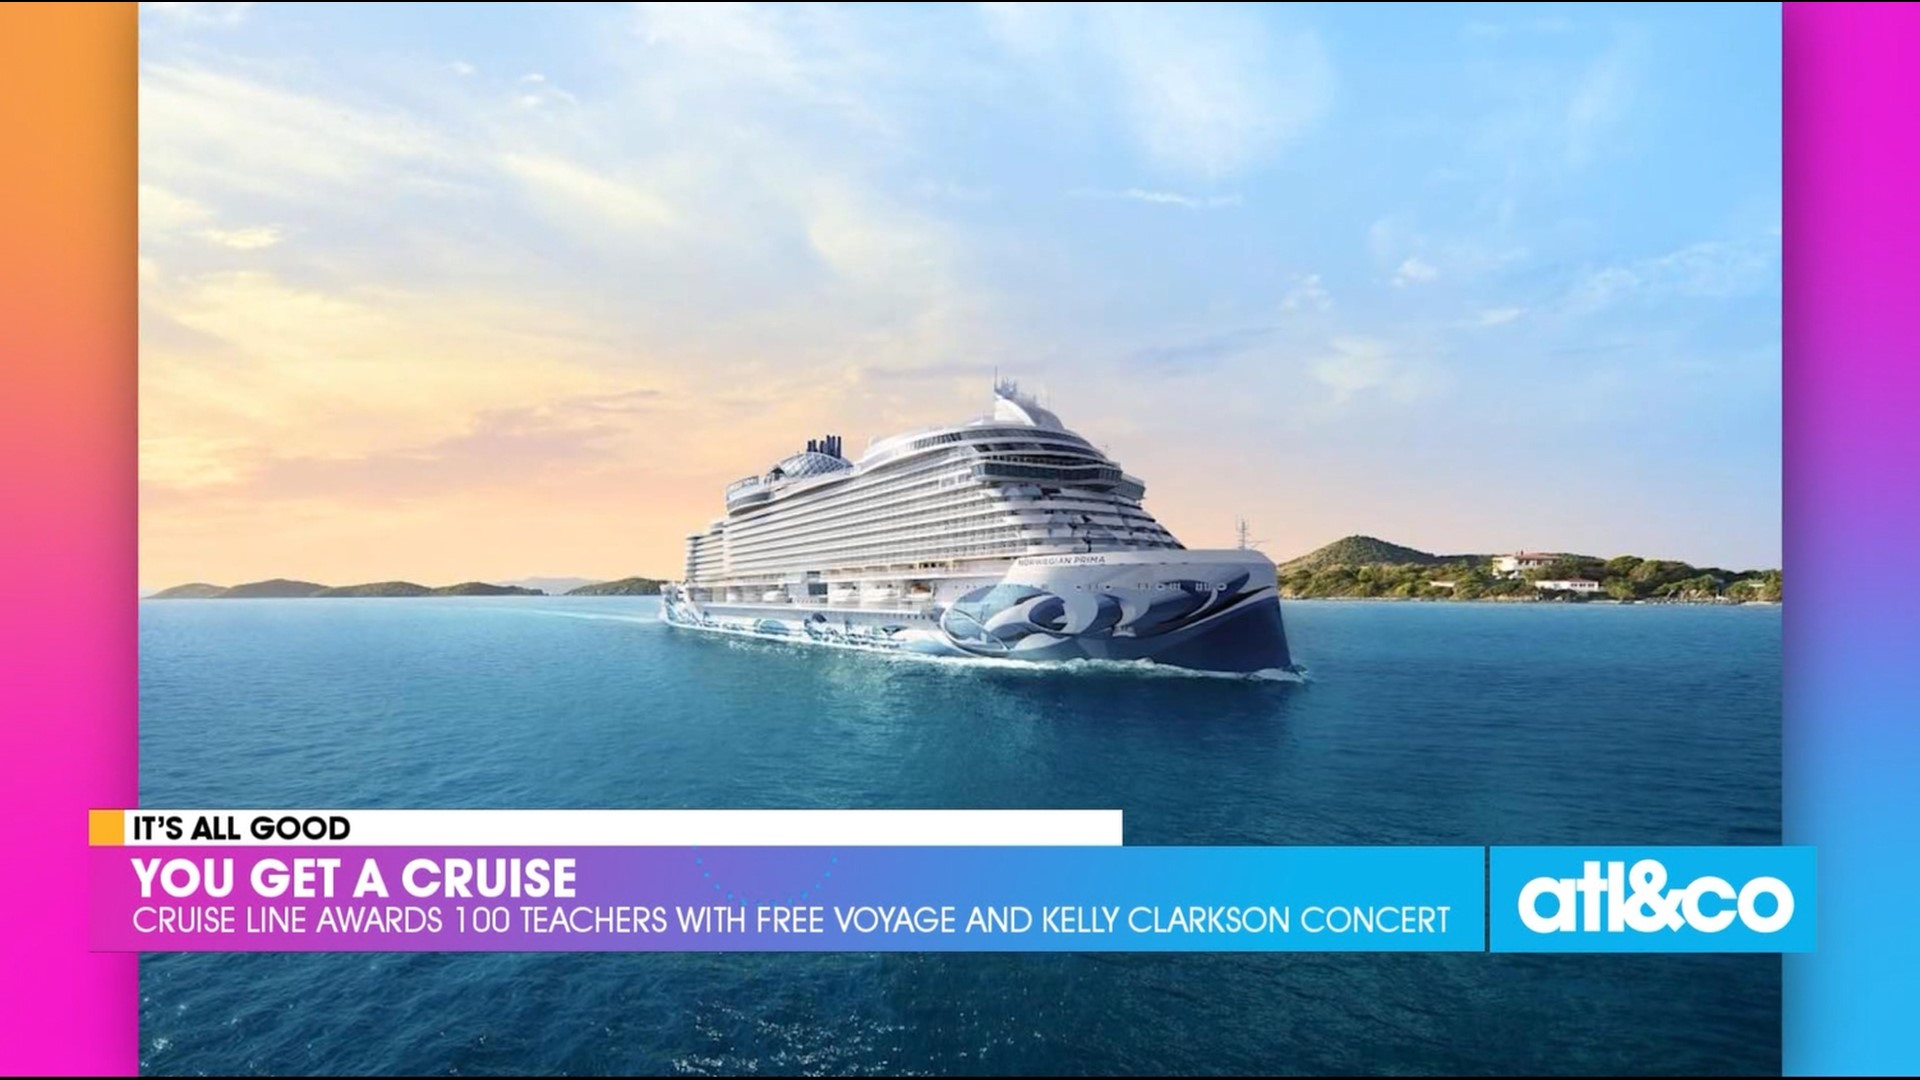 Norwegian's giving joy! 100 hardworking teachers are getting some "extra credit" with a free cruise trip AND a special concert from Kelly Clarkson.